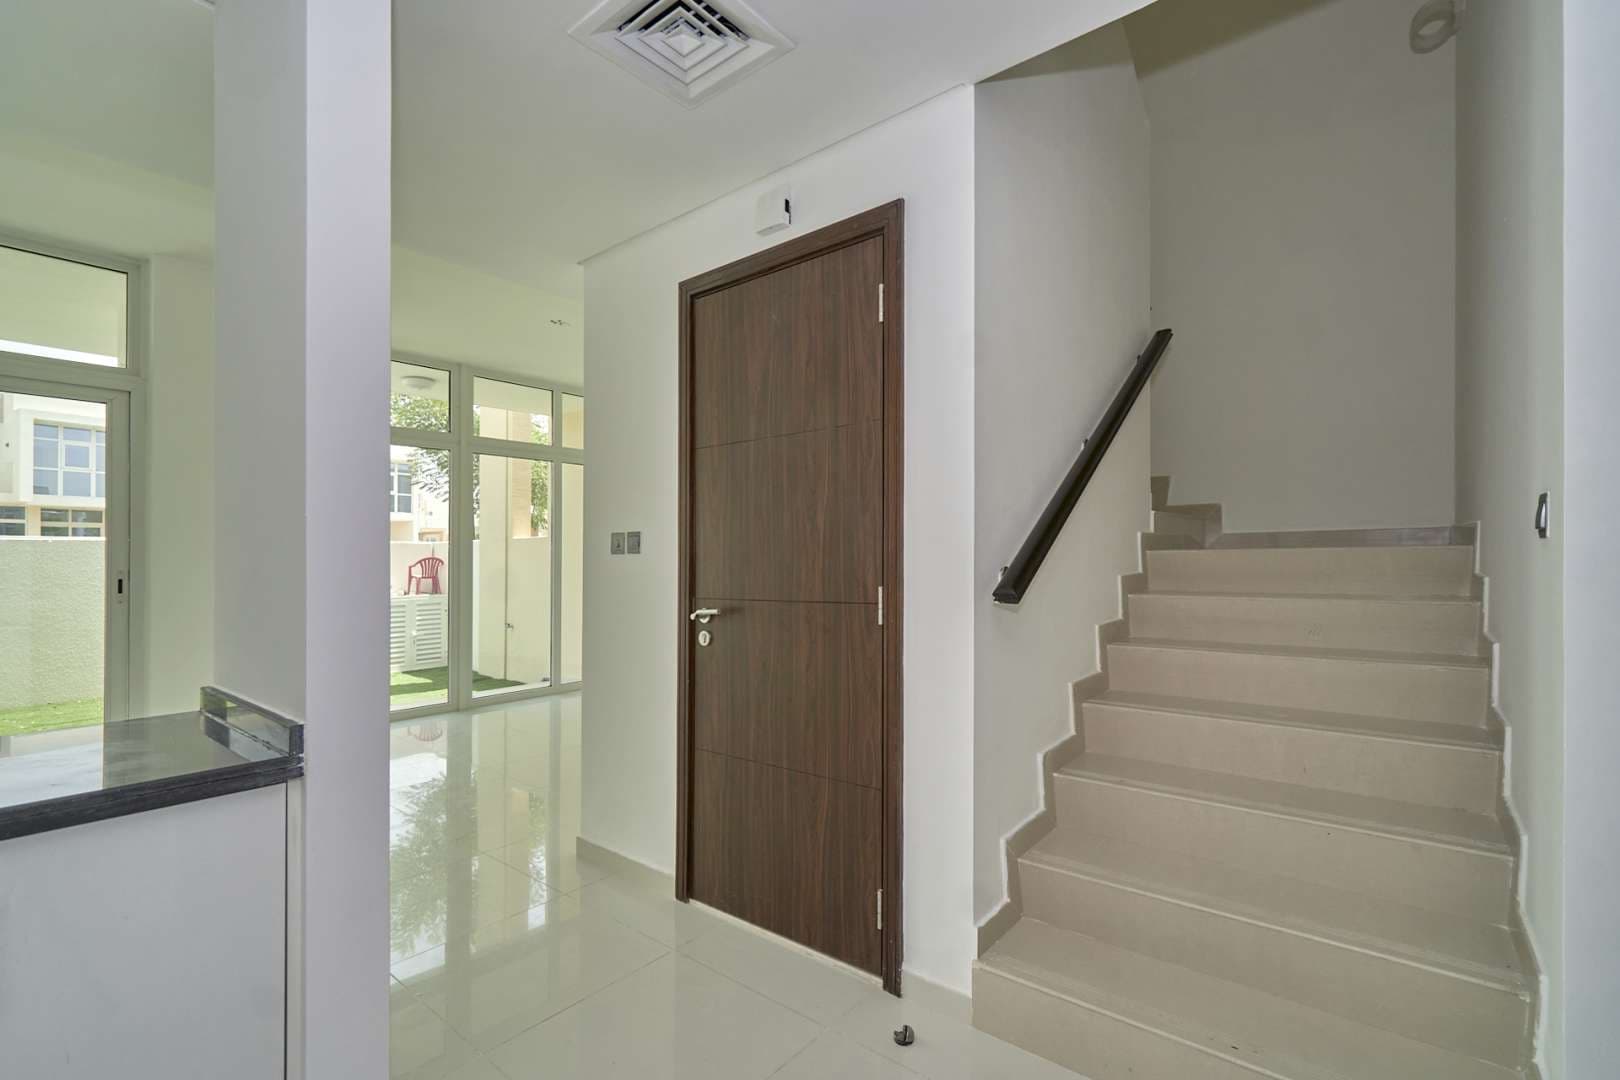 3 Bedroom Townhouse For Rent Amazonia Lp08372 1a895fdba820a600.jpg